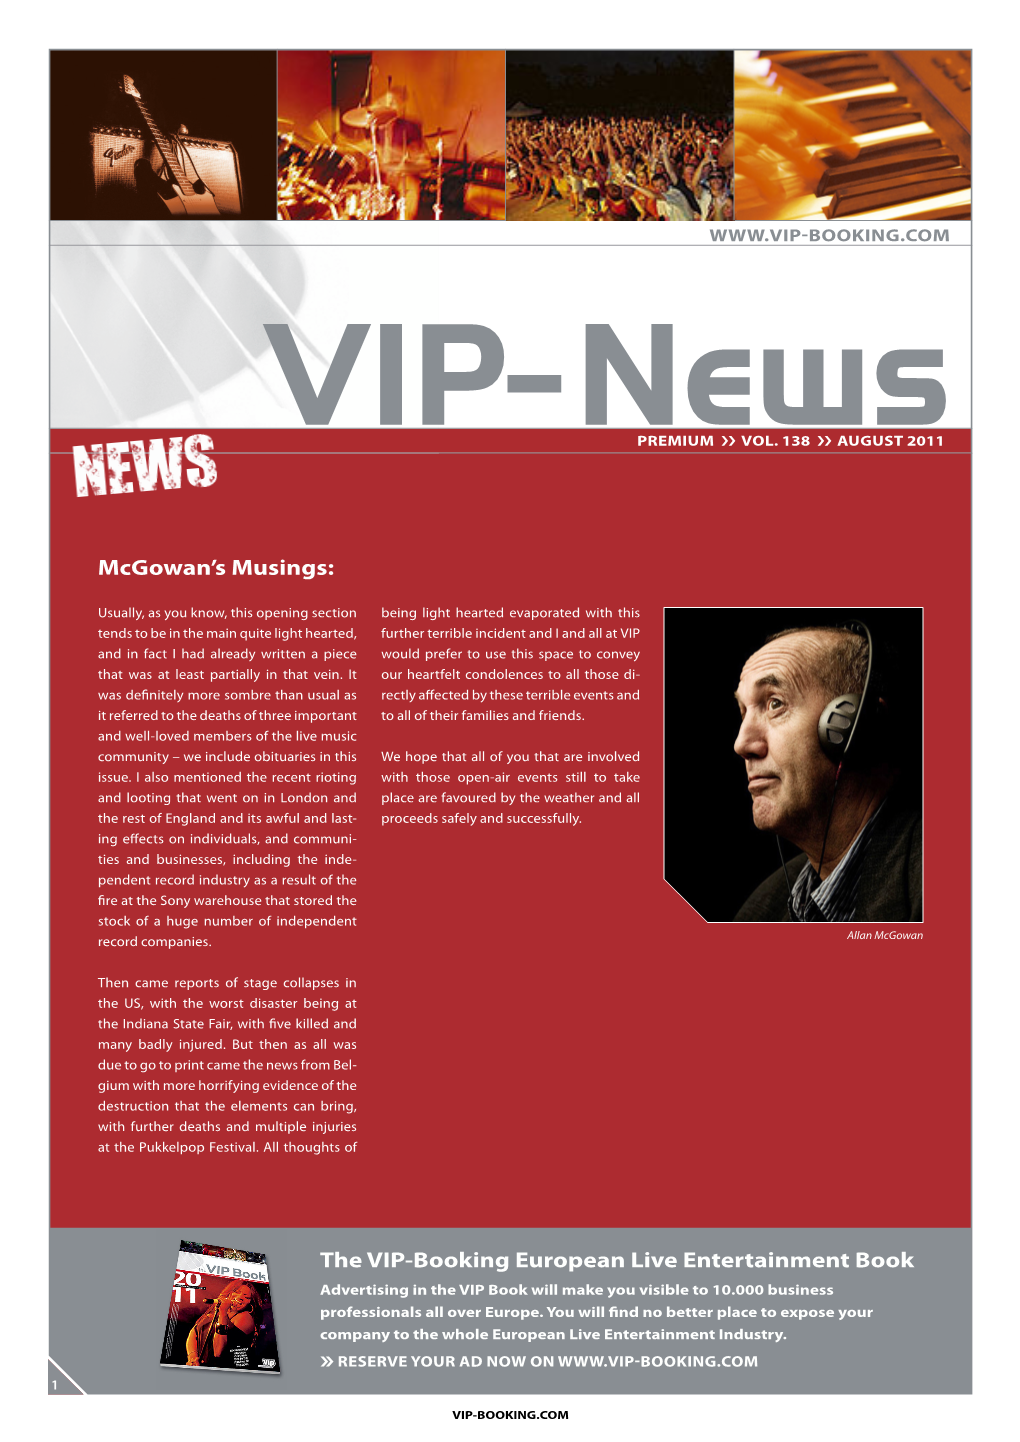 The VIP-Booking European Live Entertainment Book Advertising in the VIP Book Will Make You Visible to 10.000 Business Professionals All Over Europe